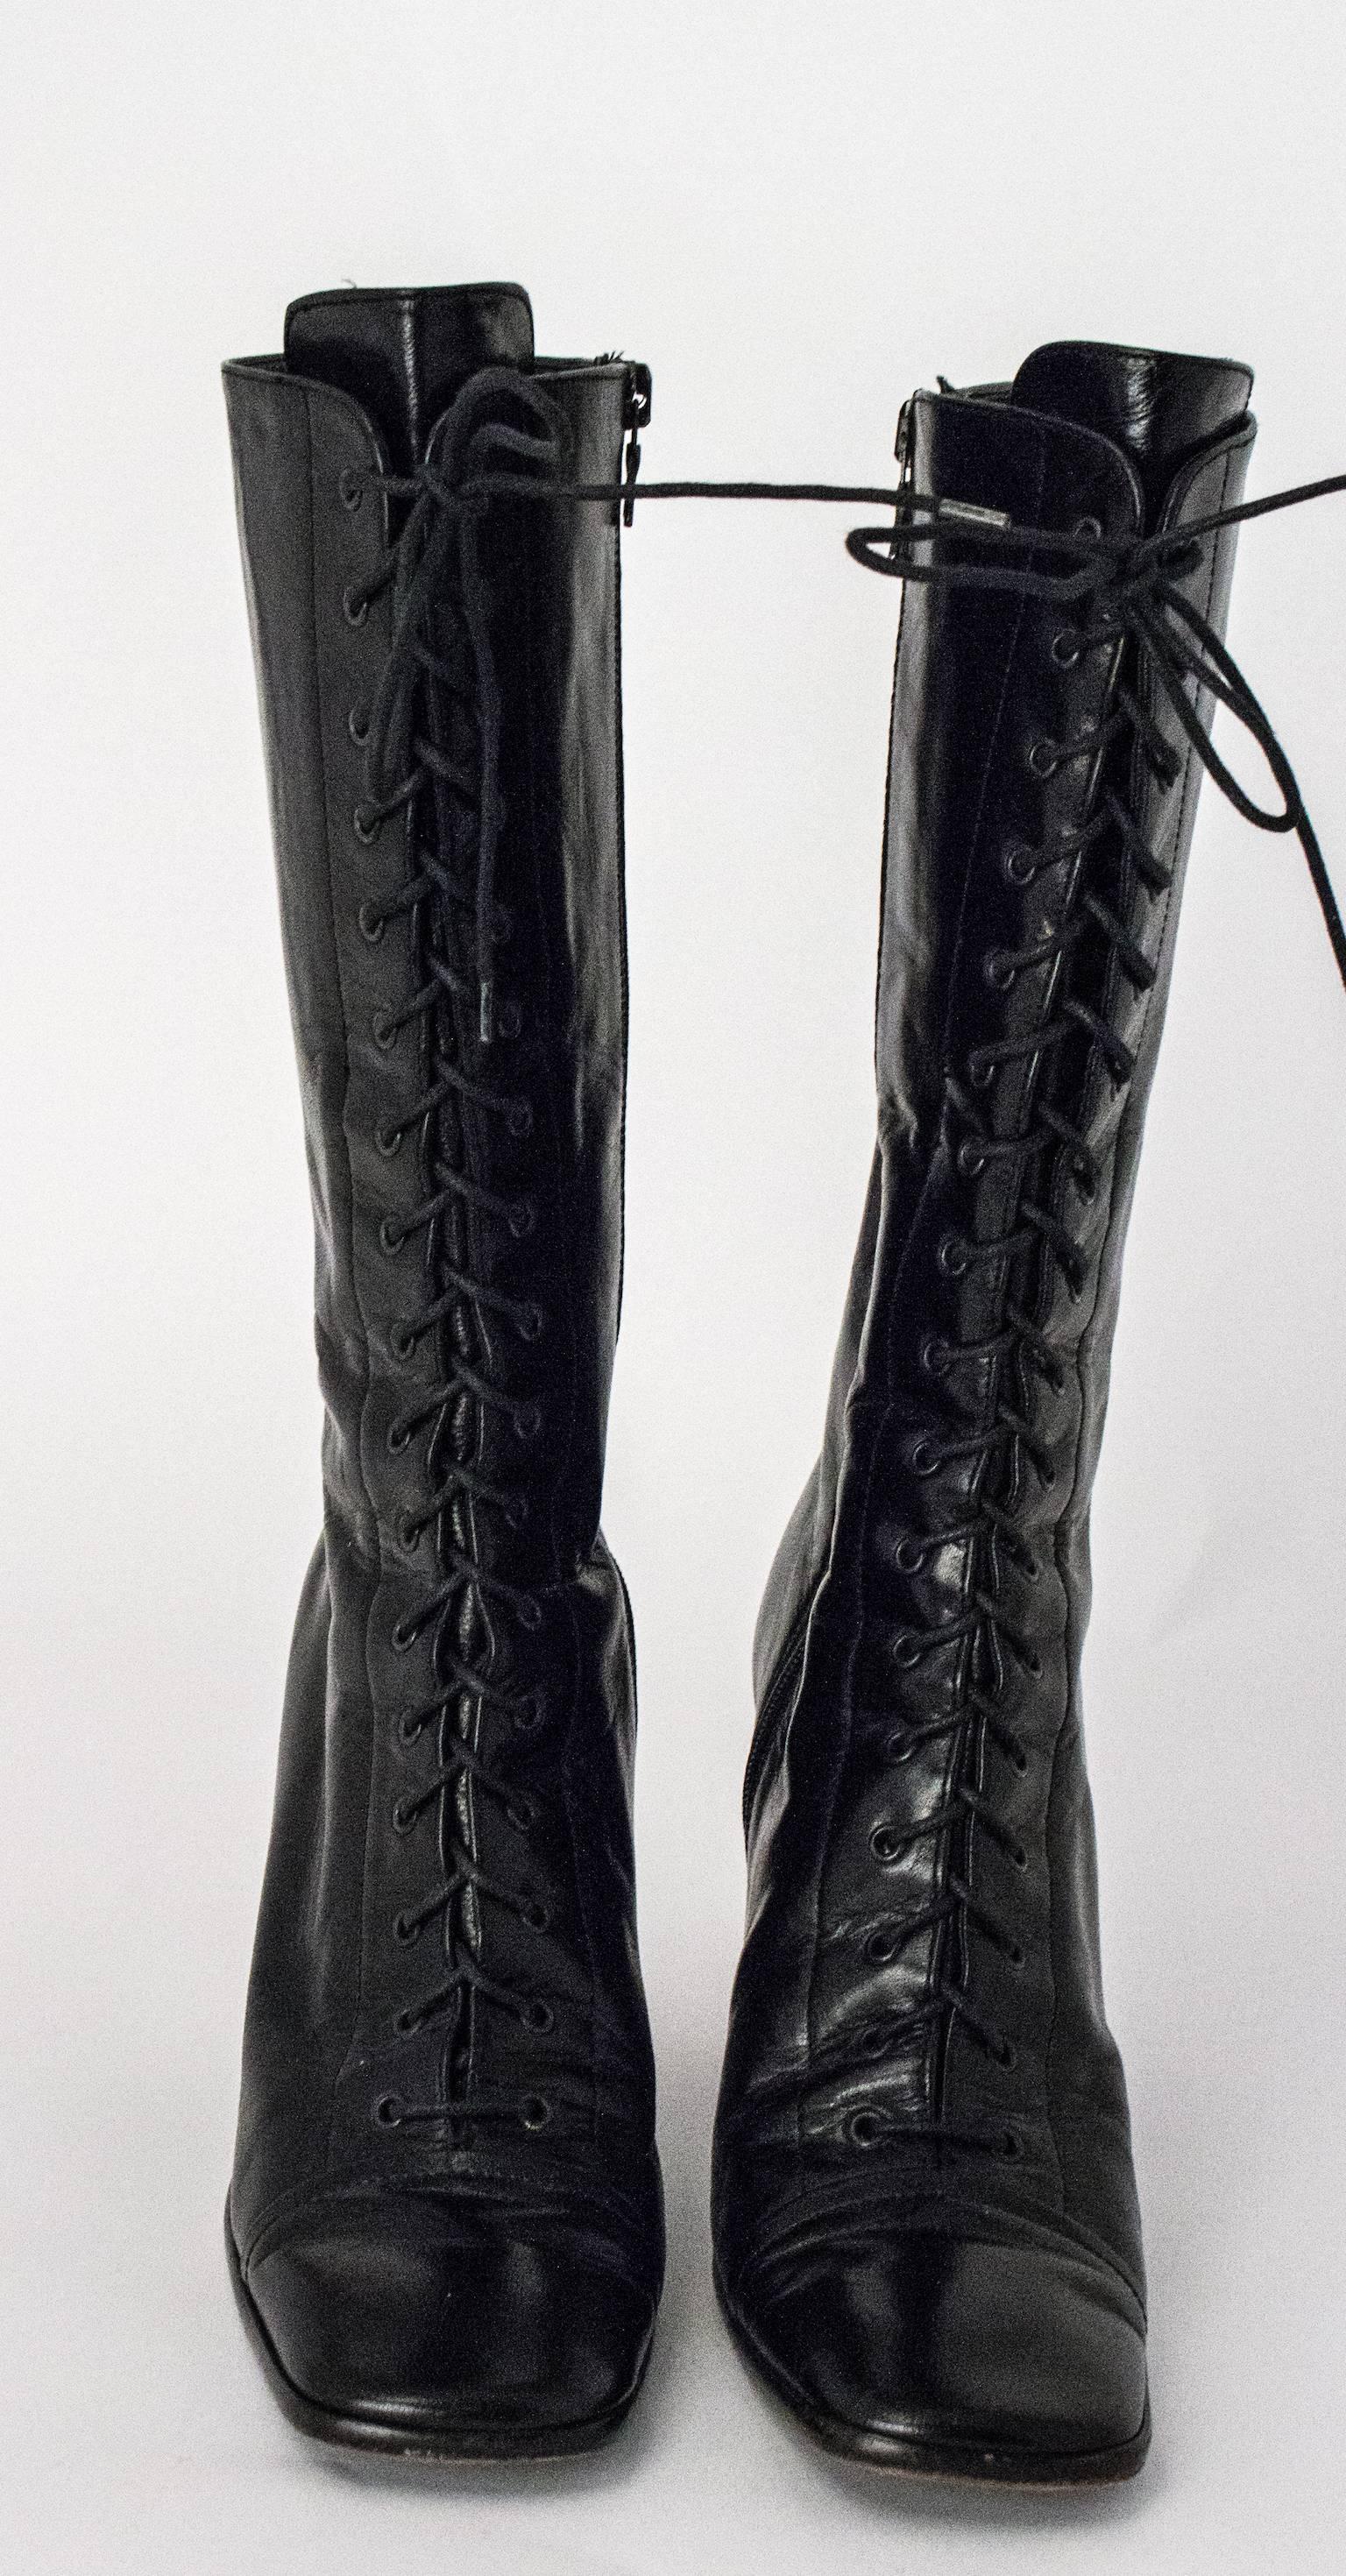 1990s black leather lace square toe boots. 2 1/2